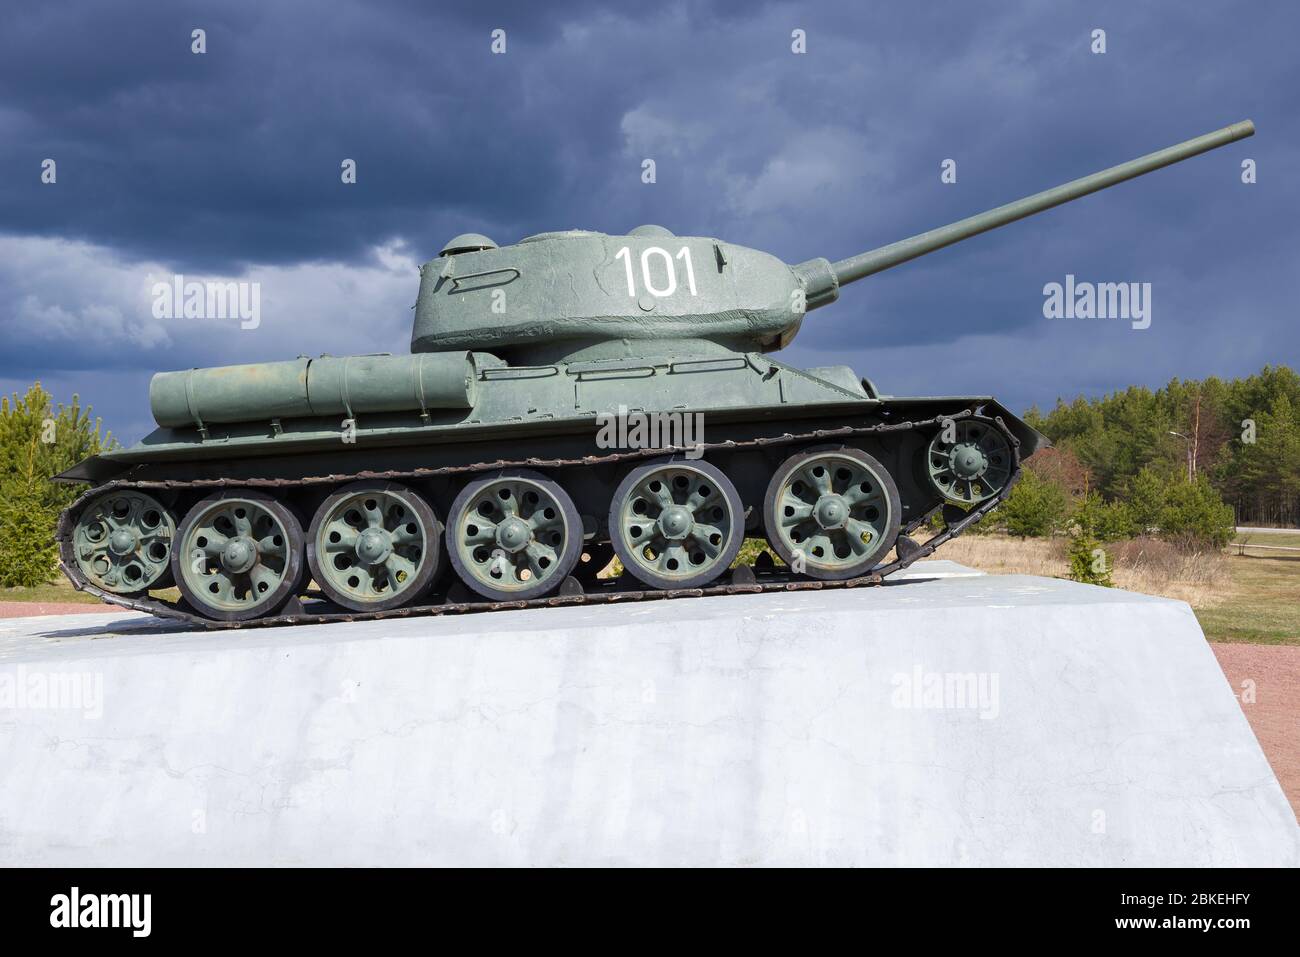 KIROVSK, RUSSIA - APRIL 26, 2020: Tank-monument T-34-85 on the Nevsky Patch under a stormy sky in April afternoon Stock Photo